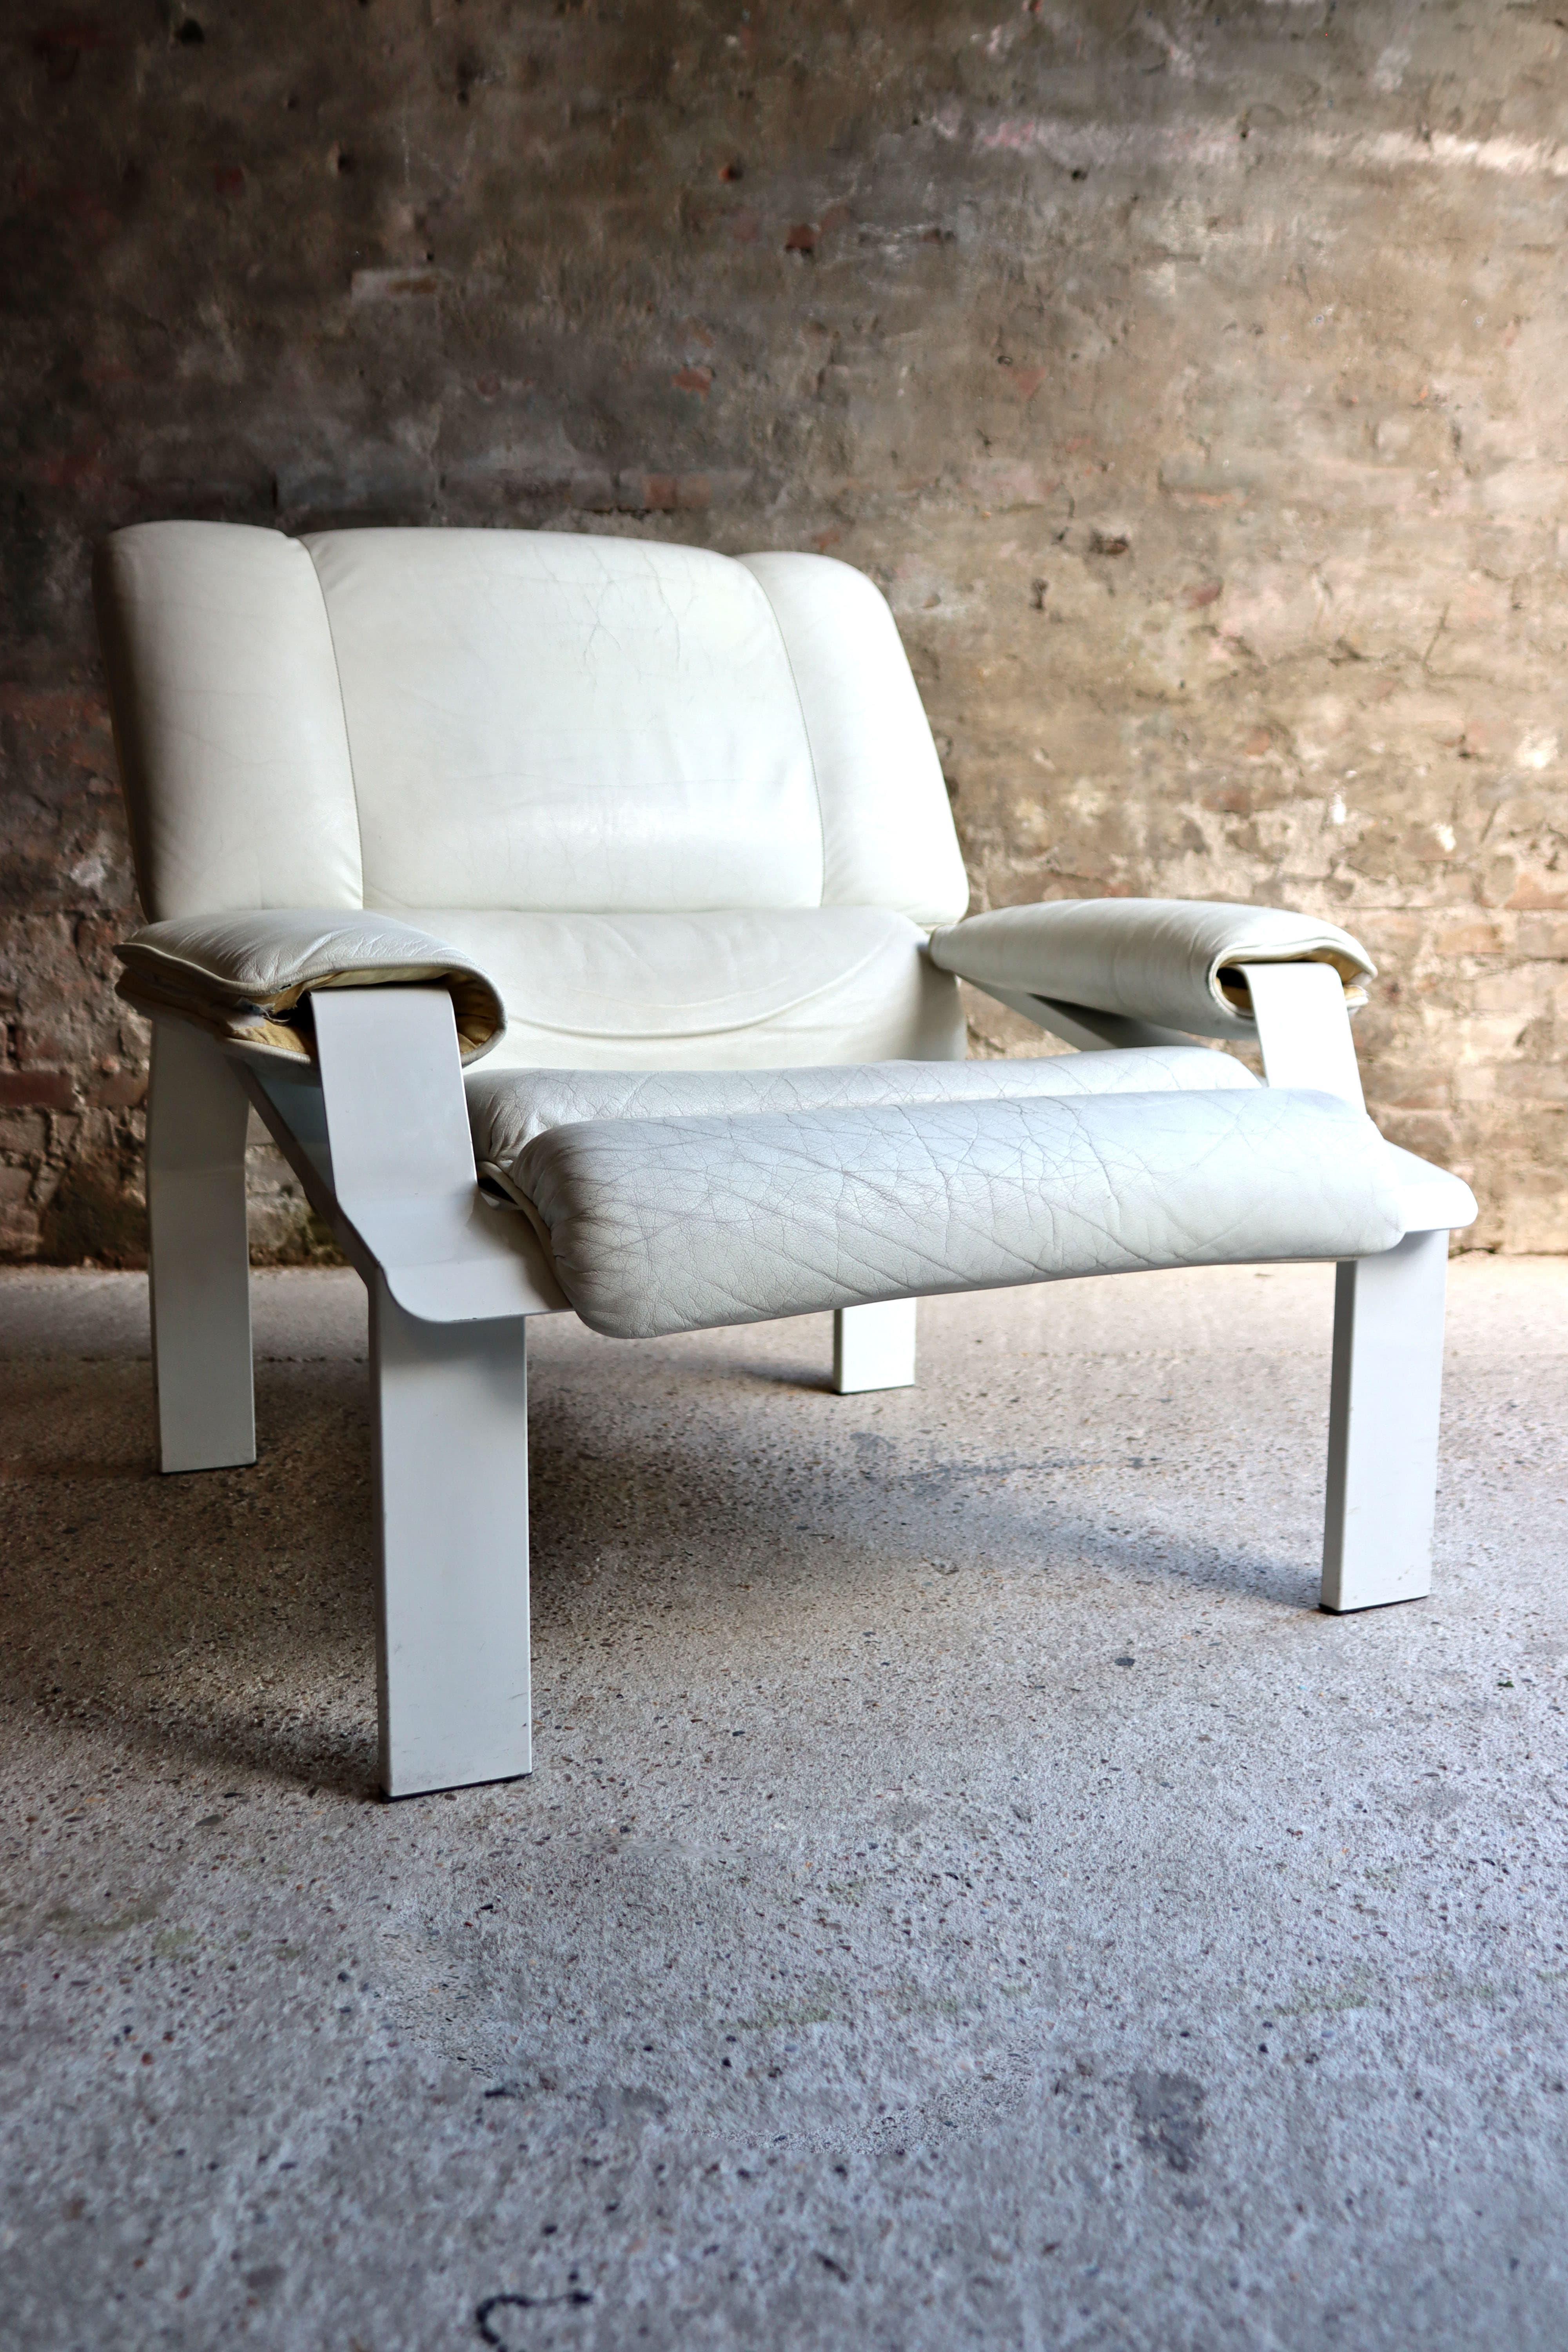 This cool chair is named LEM chair and is designed by Joe Colombo for Bieffeplast in 1964. It’s named LEM due to its similarity to a spaceship it was called Lem in honor of Stanislaw Lem, the author of the novel Solaris. This chair has a white